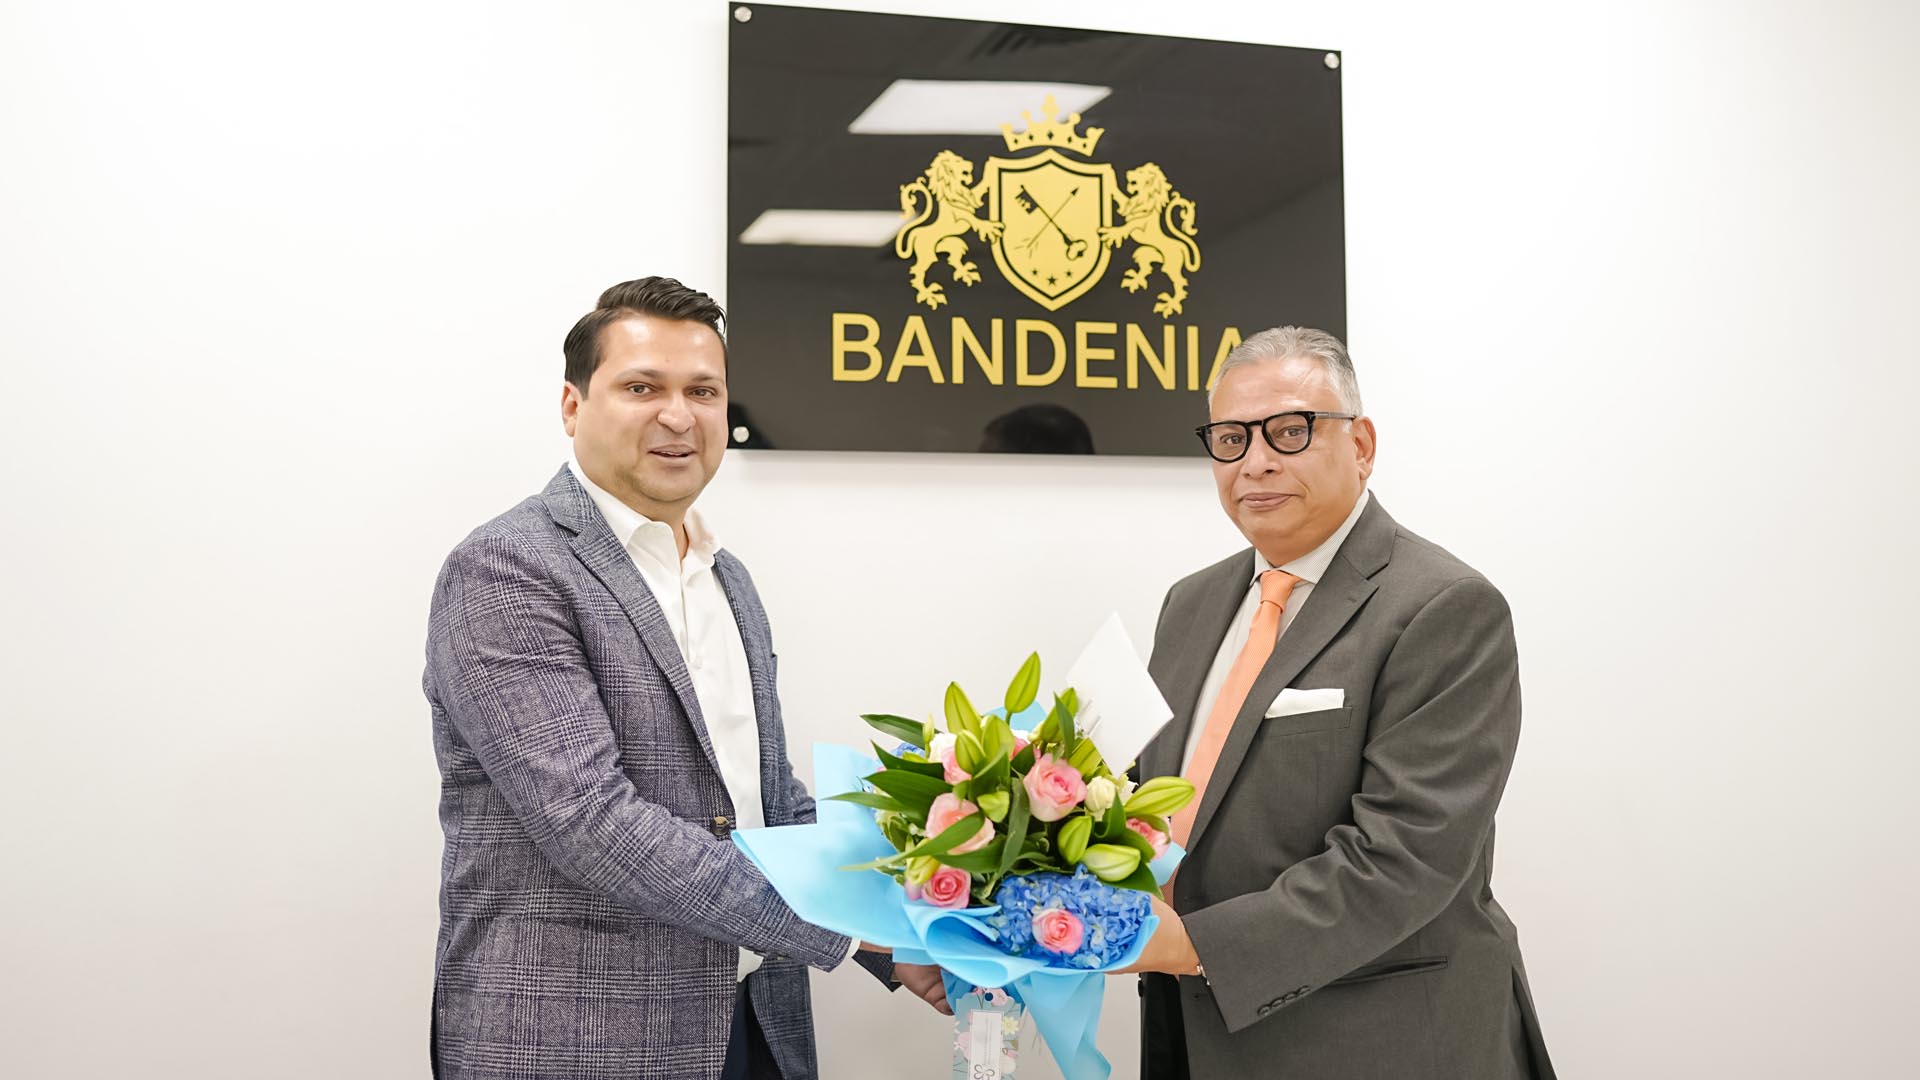 Imran Qureshi, Managing Director of Bandenia Challenger Finance  ( BCF) felicitated Tarique Afzal , President and Managing Director of AB Bank at the MOU signing ceremony